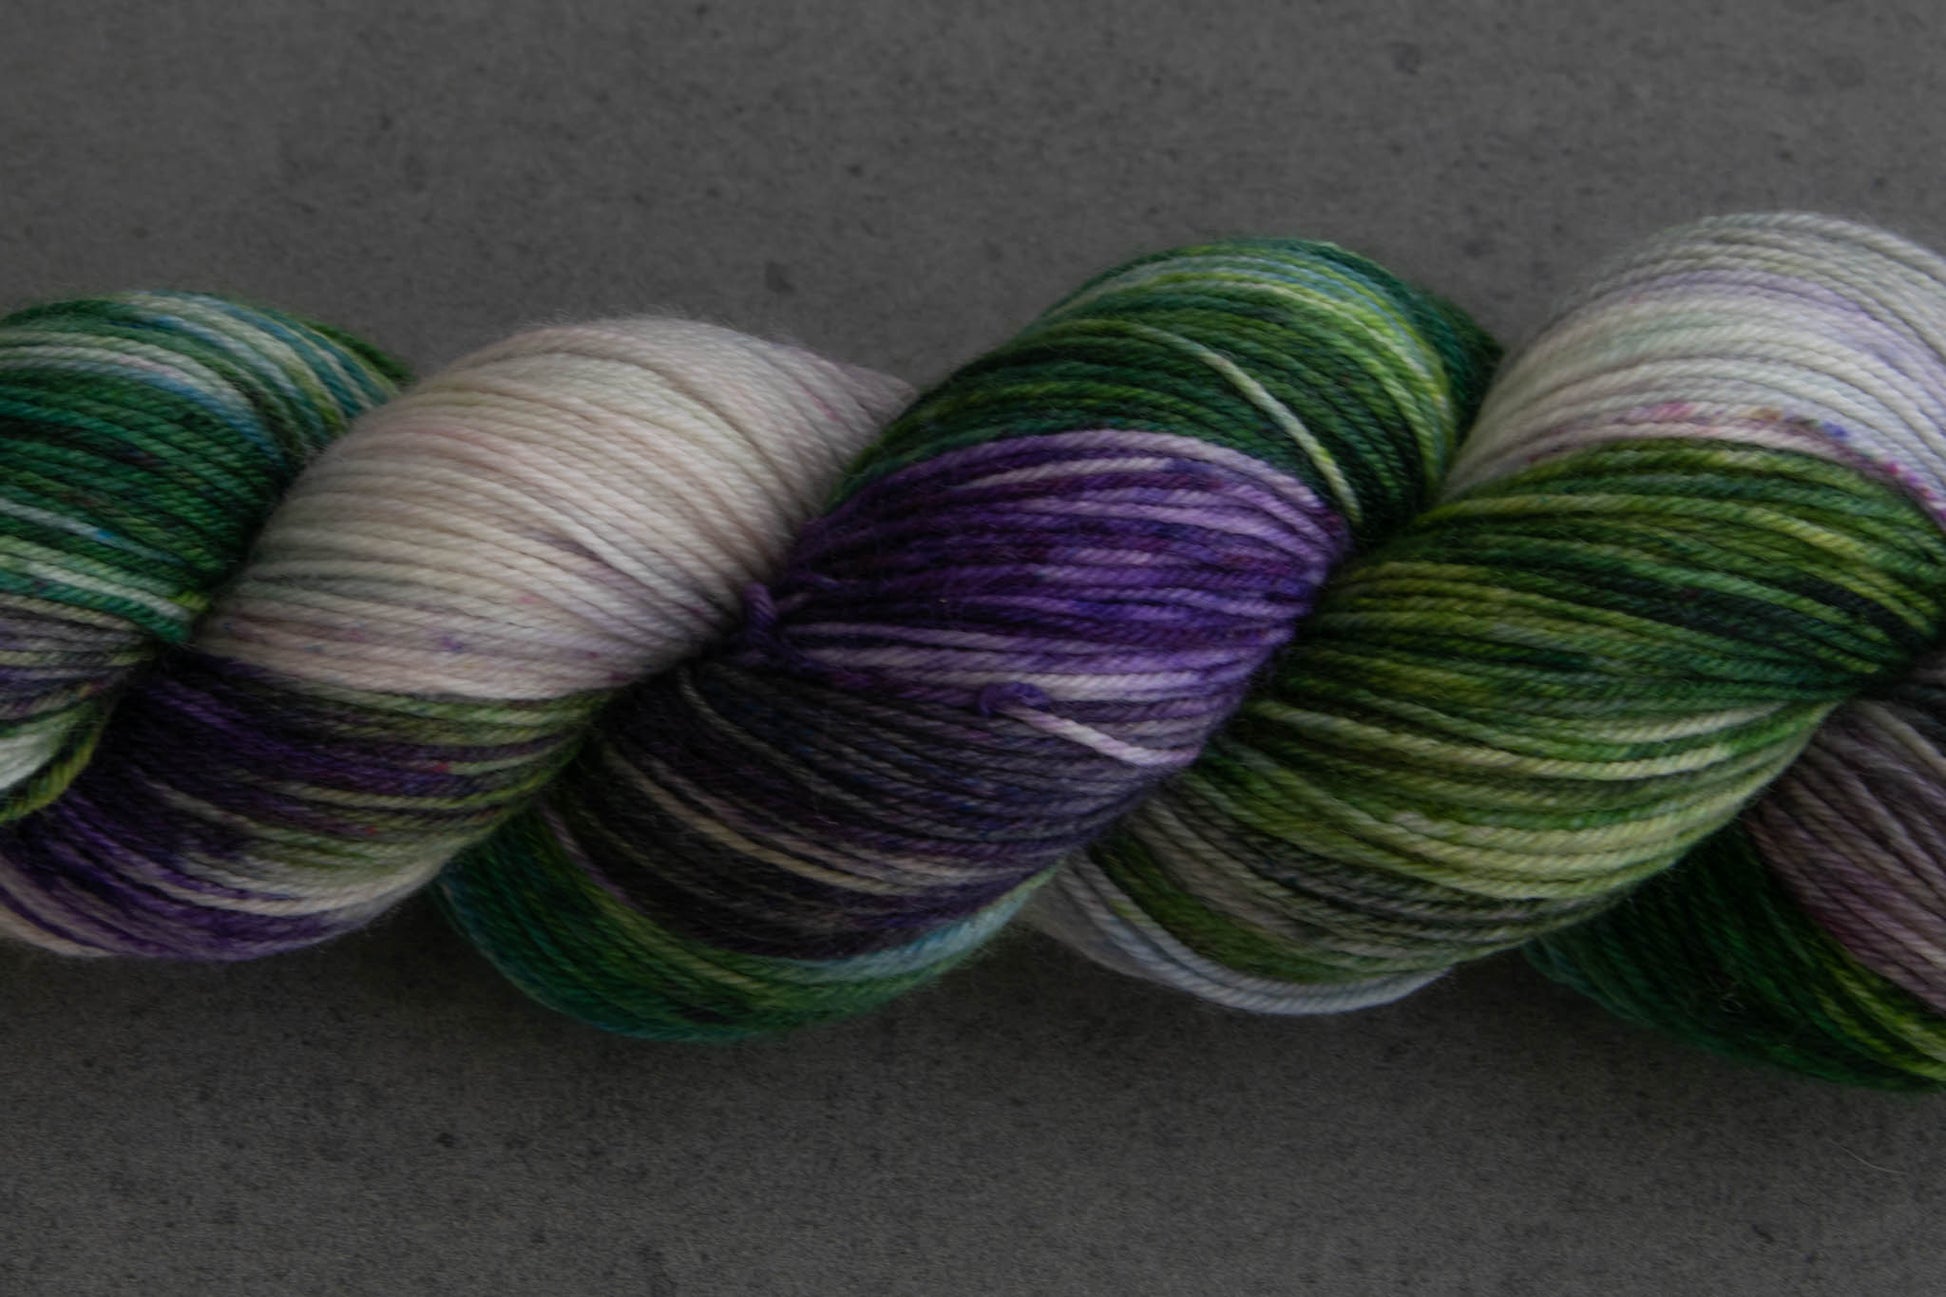 Closeup on the variegations, including sections of purple, green, and white.